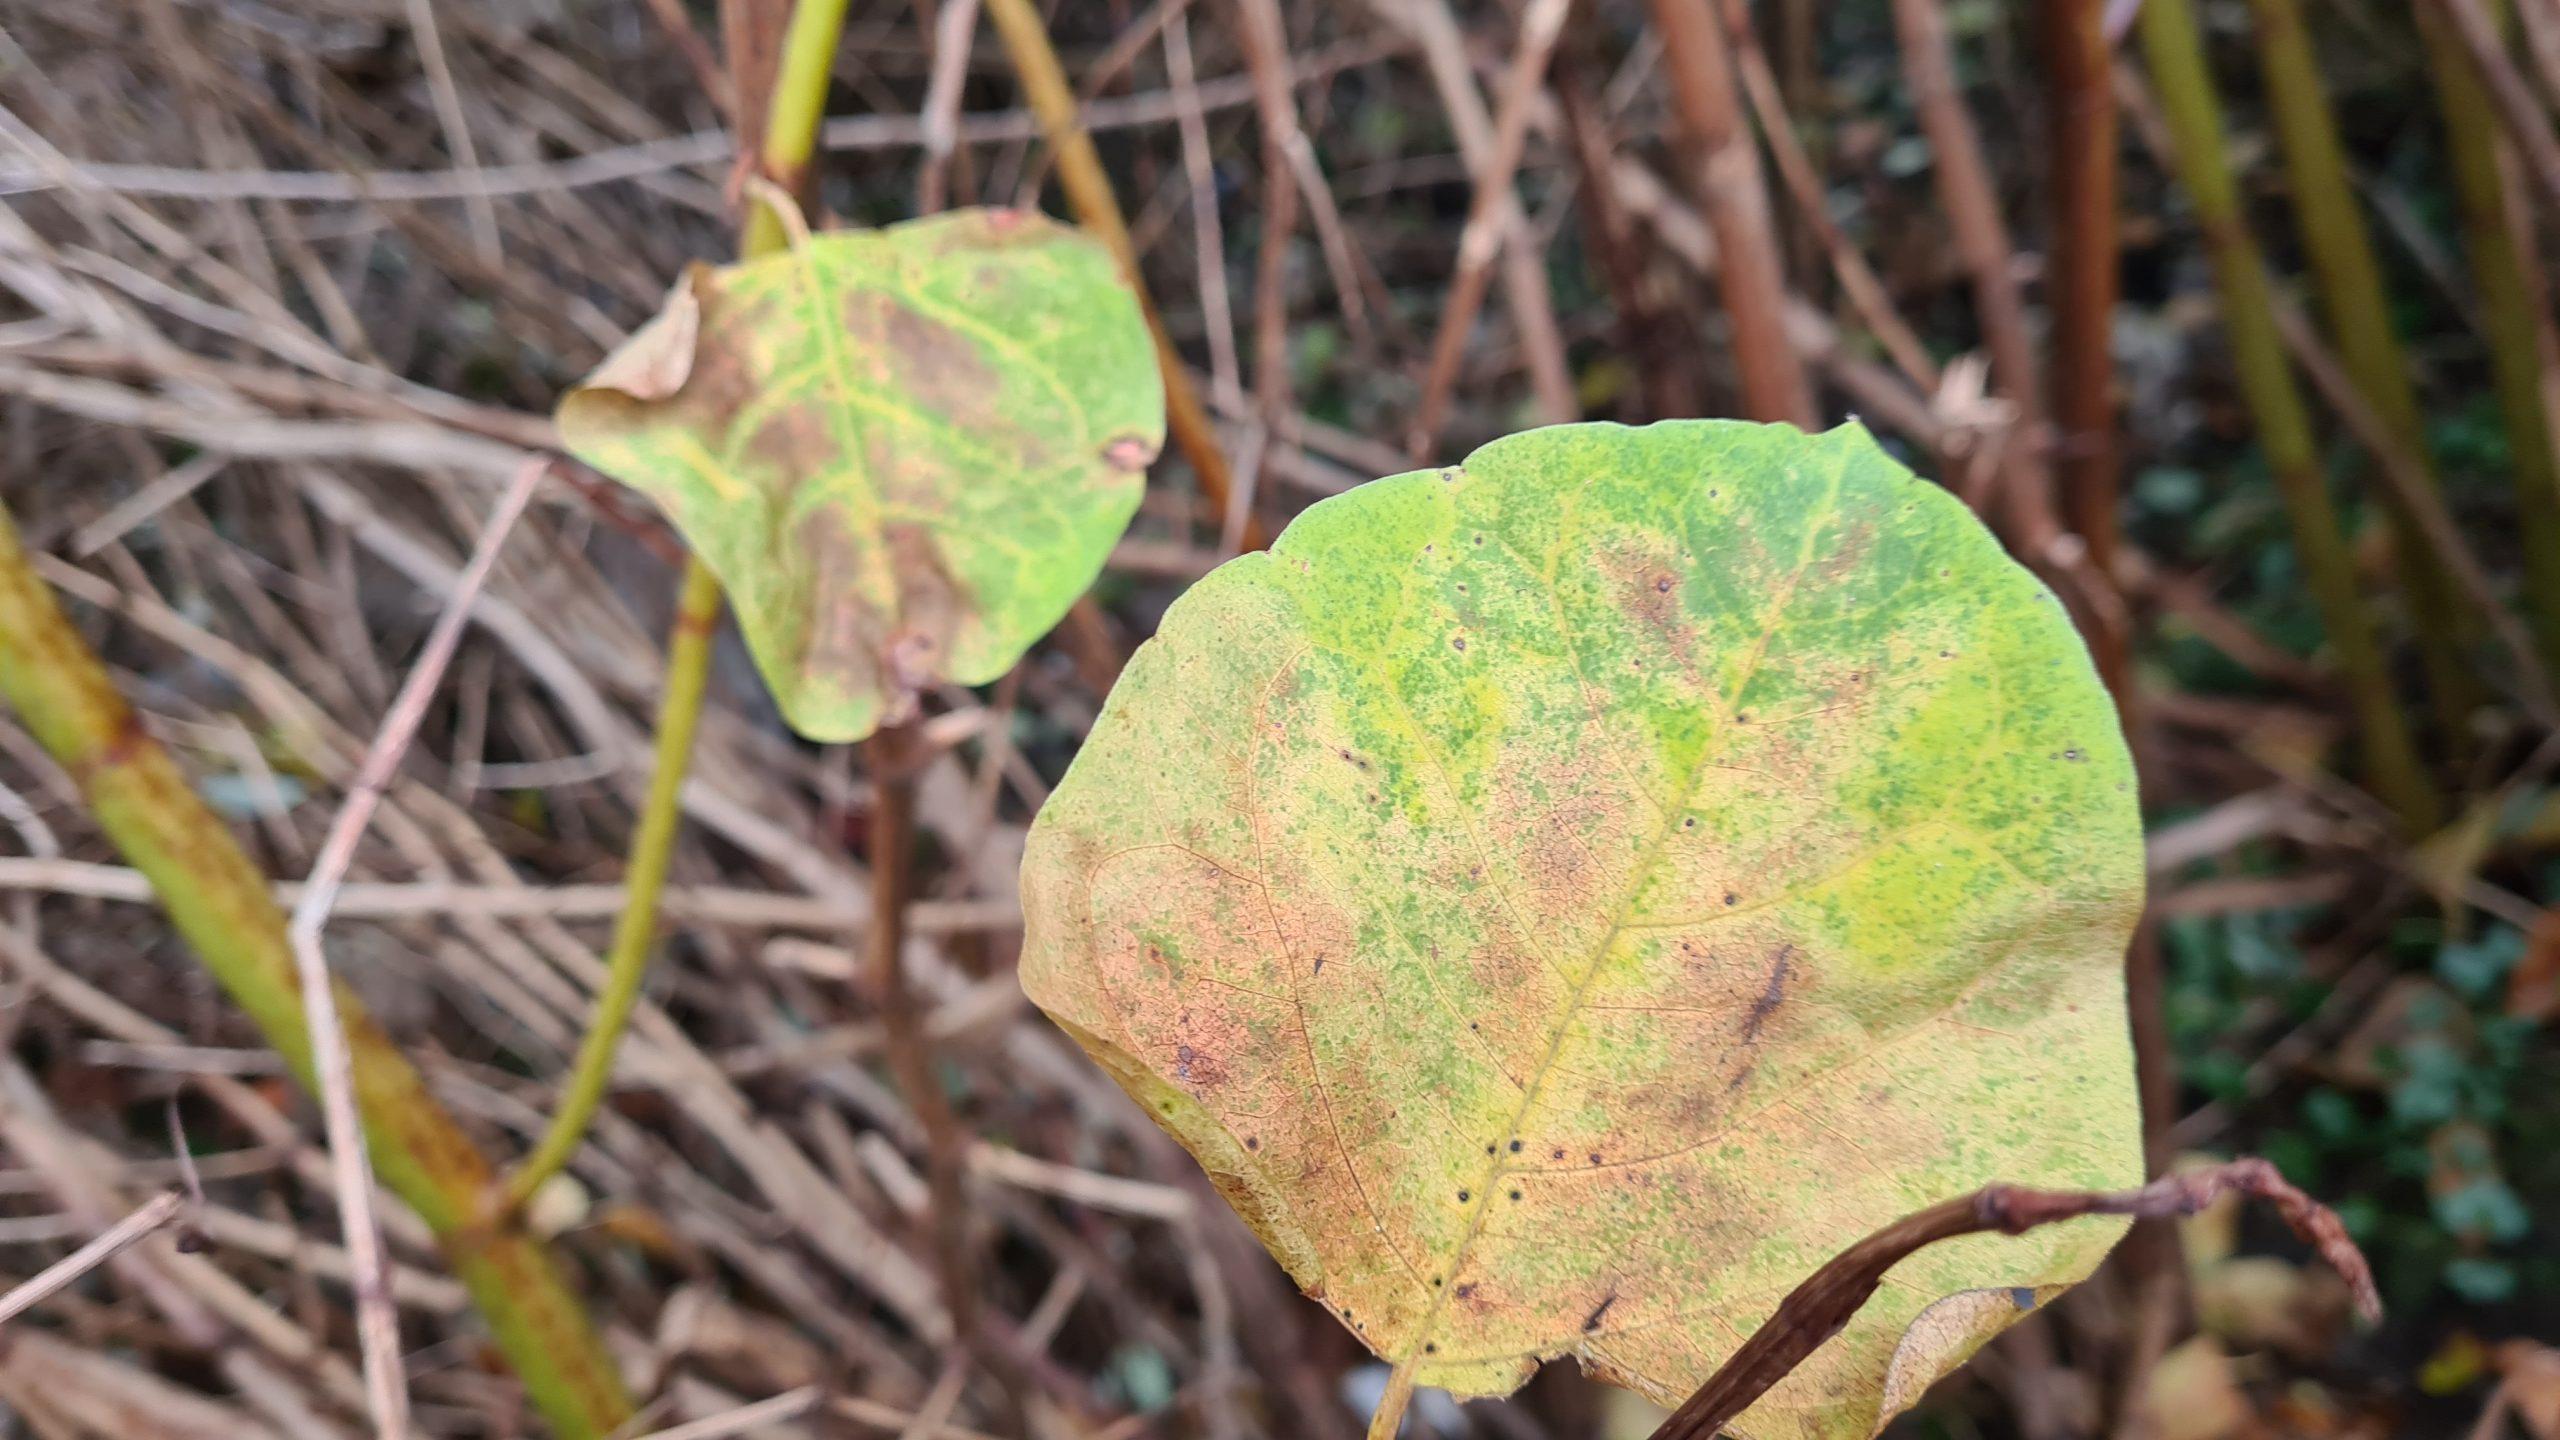 Use of a herbicide can slowly kill the knotweed with visible signs of decay